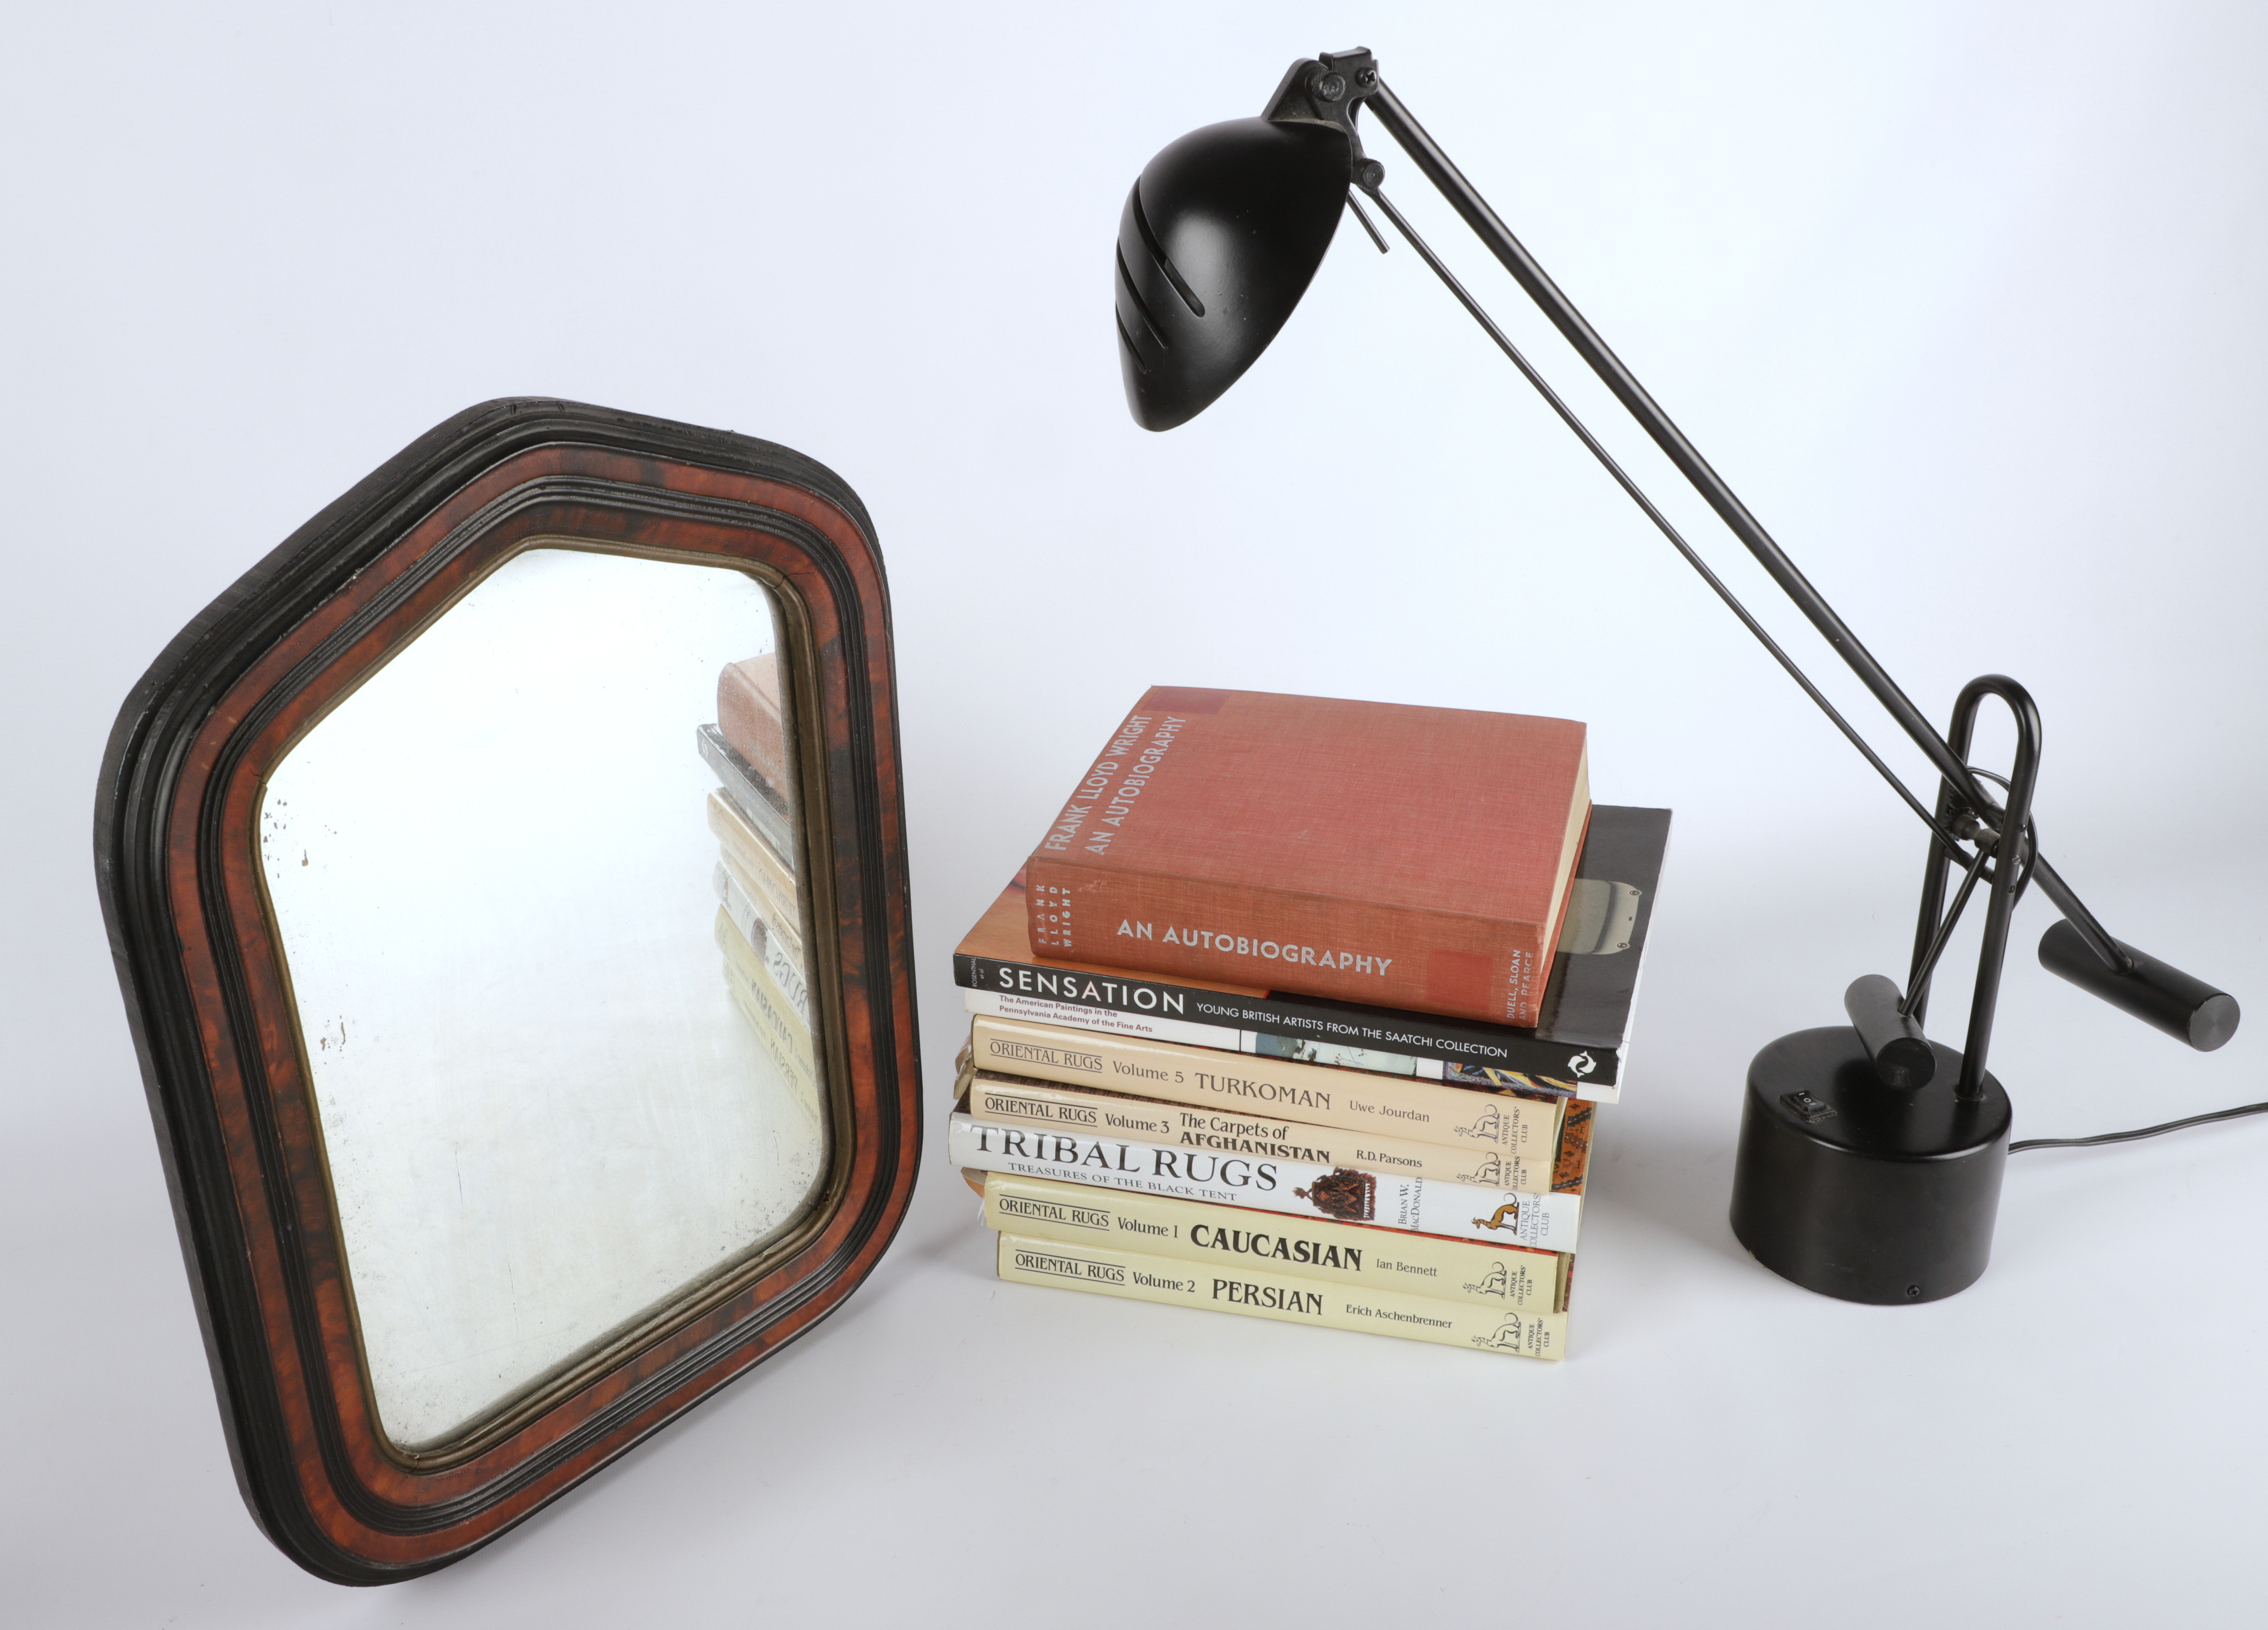 Desk light mirror and book grouping 3ca8b0